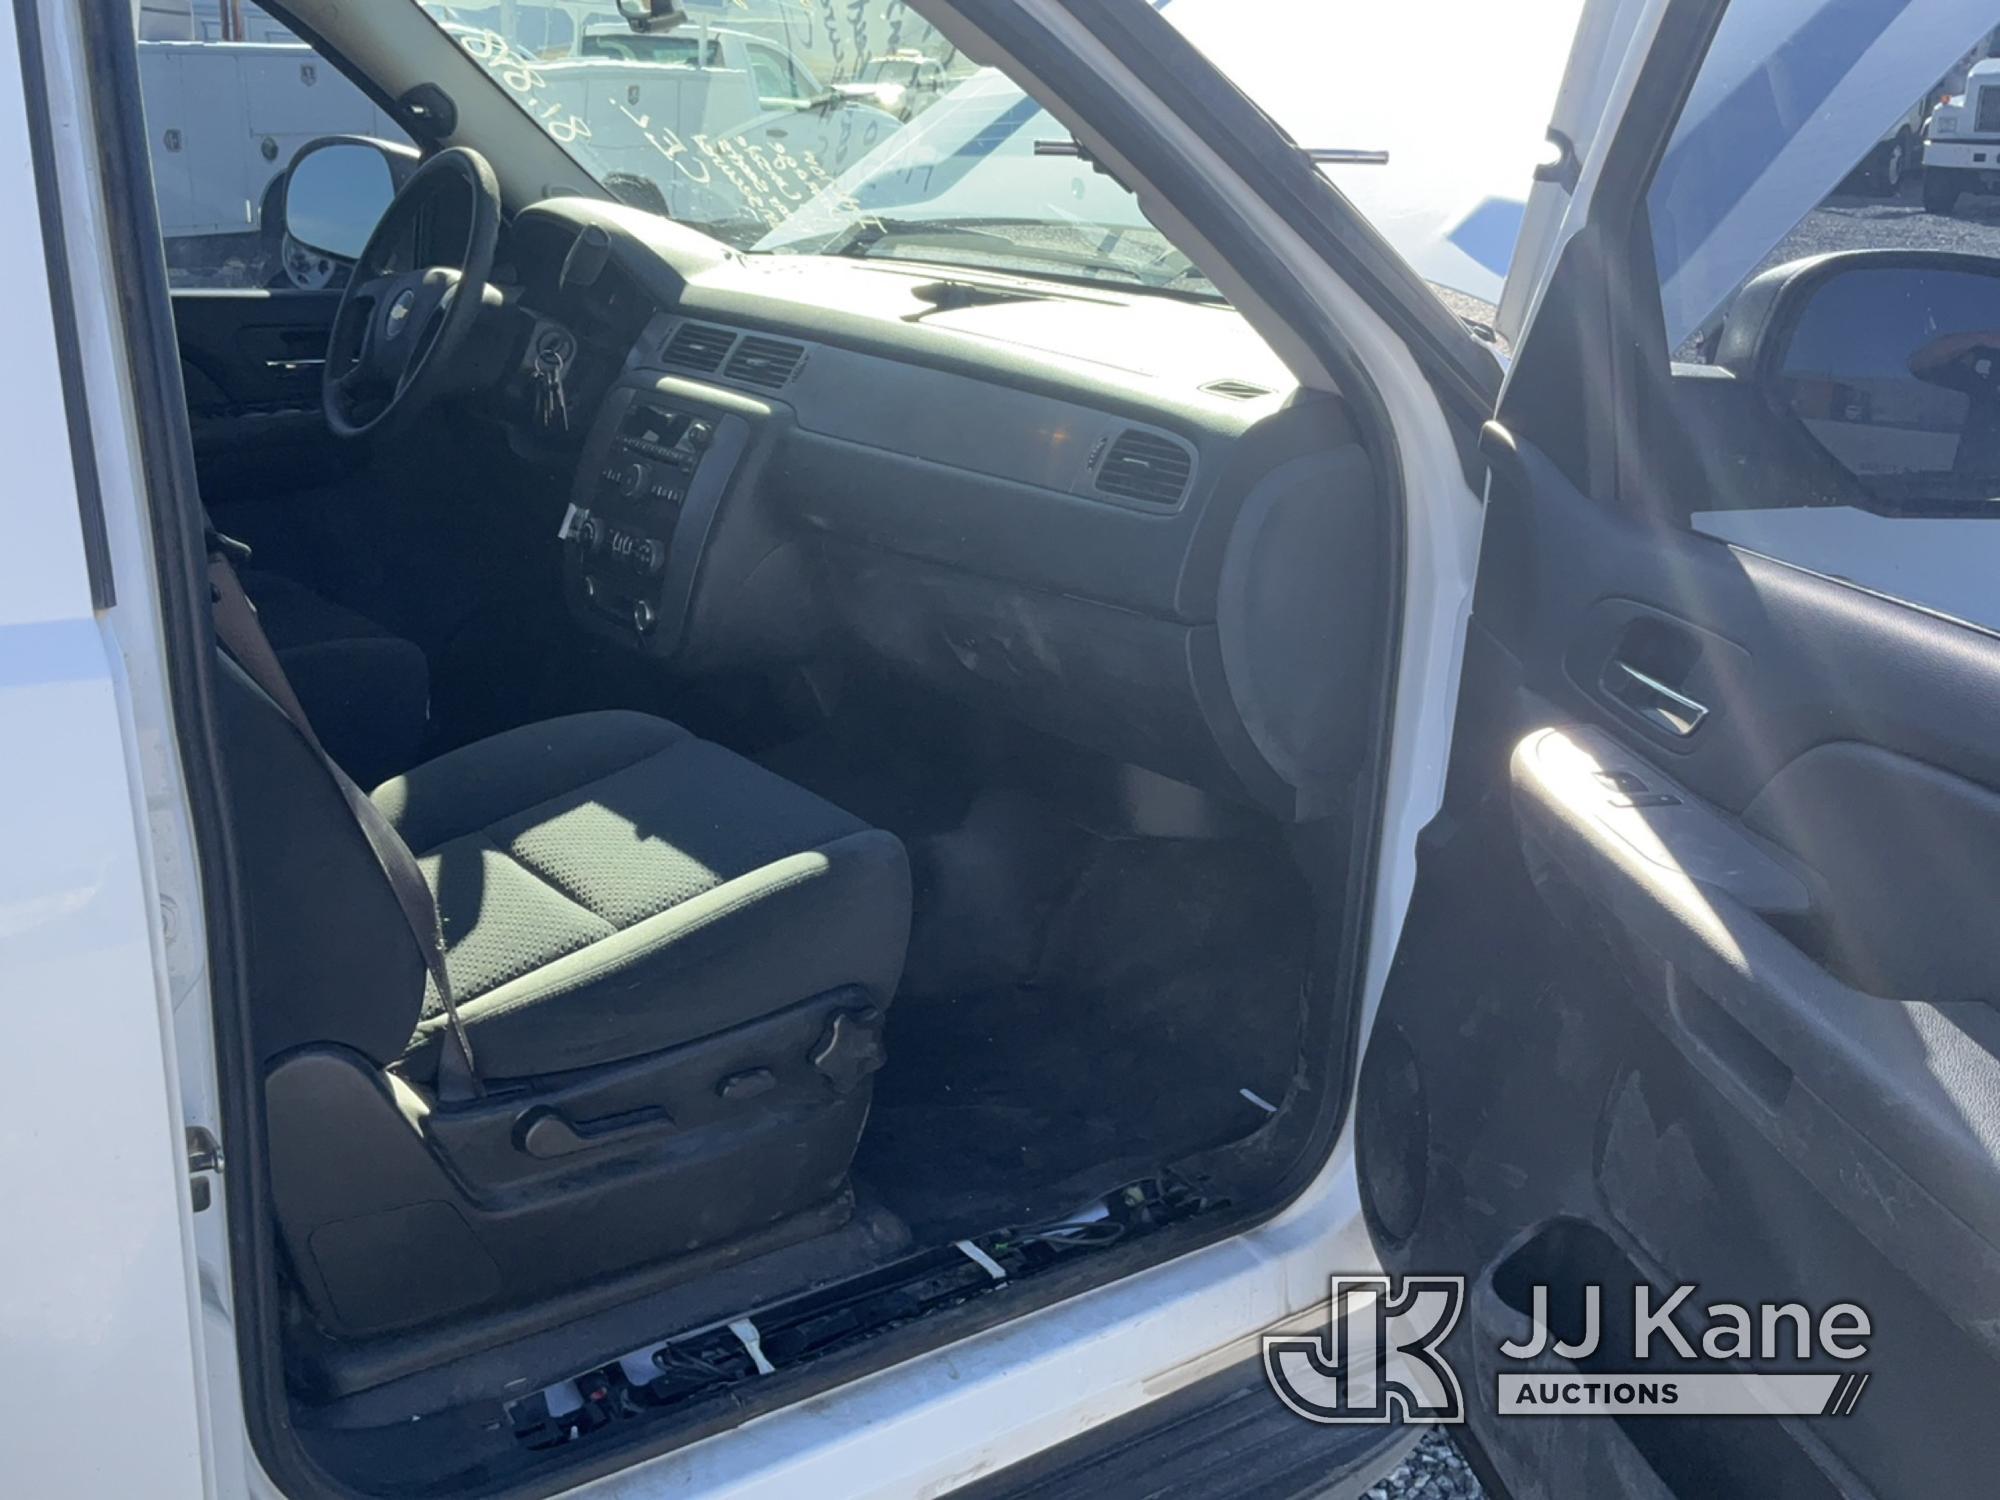 (Las Vegas, NV) 2008 Chevrolet Tahoe Police Package Interior Damage, No Console, Rear Seats Unsecure